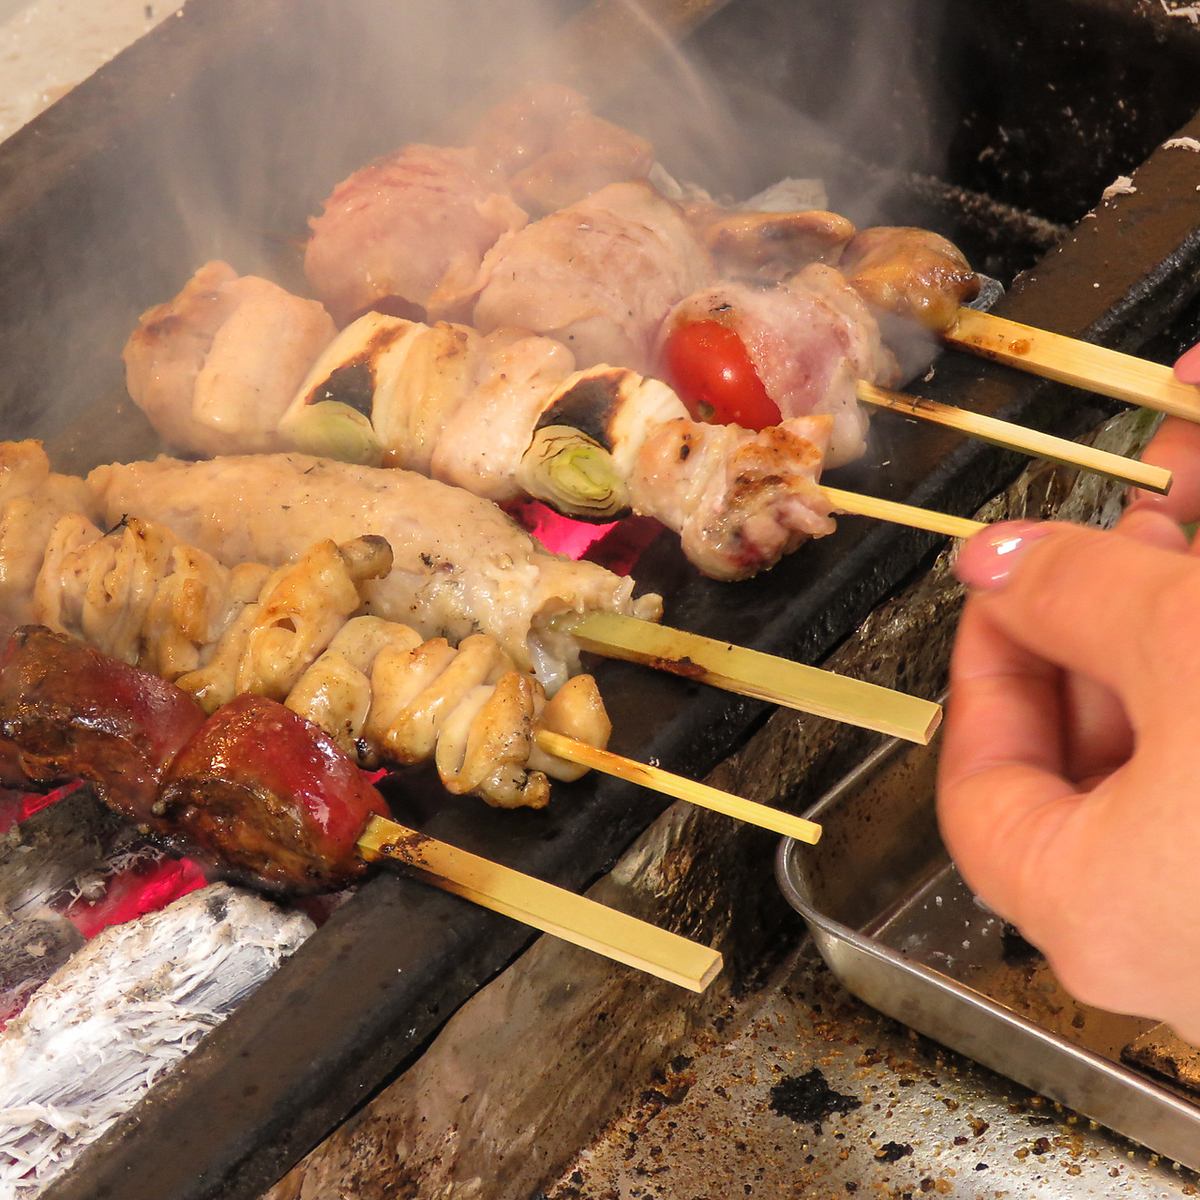 You can enjoy the charcoal-grilled skewers in a calm atmosphere.